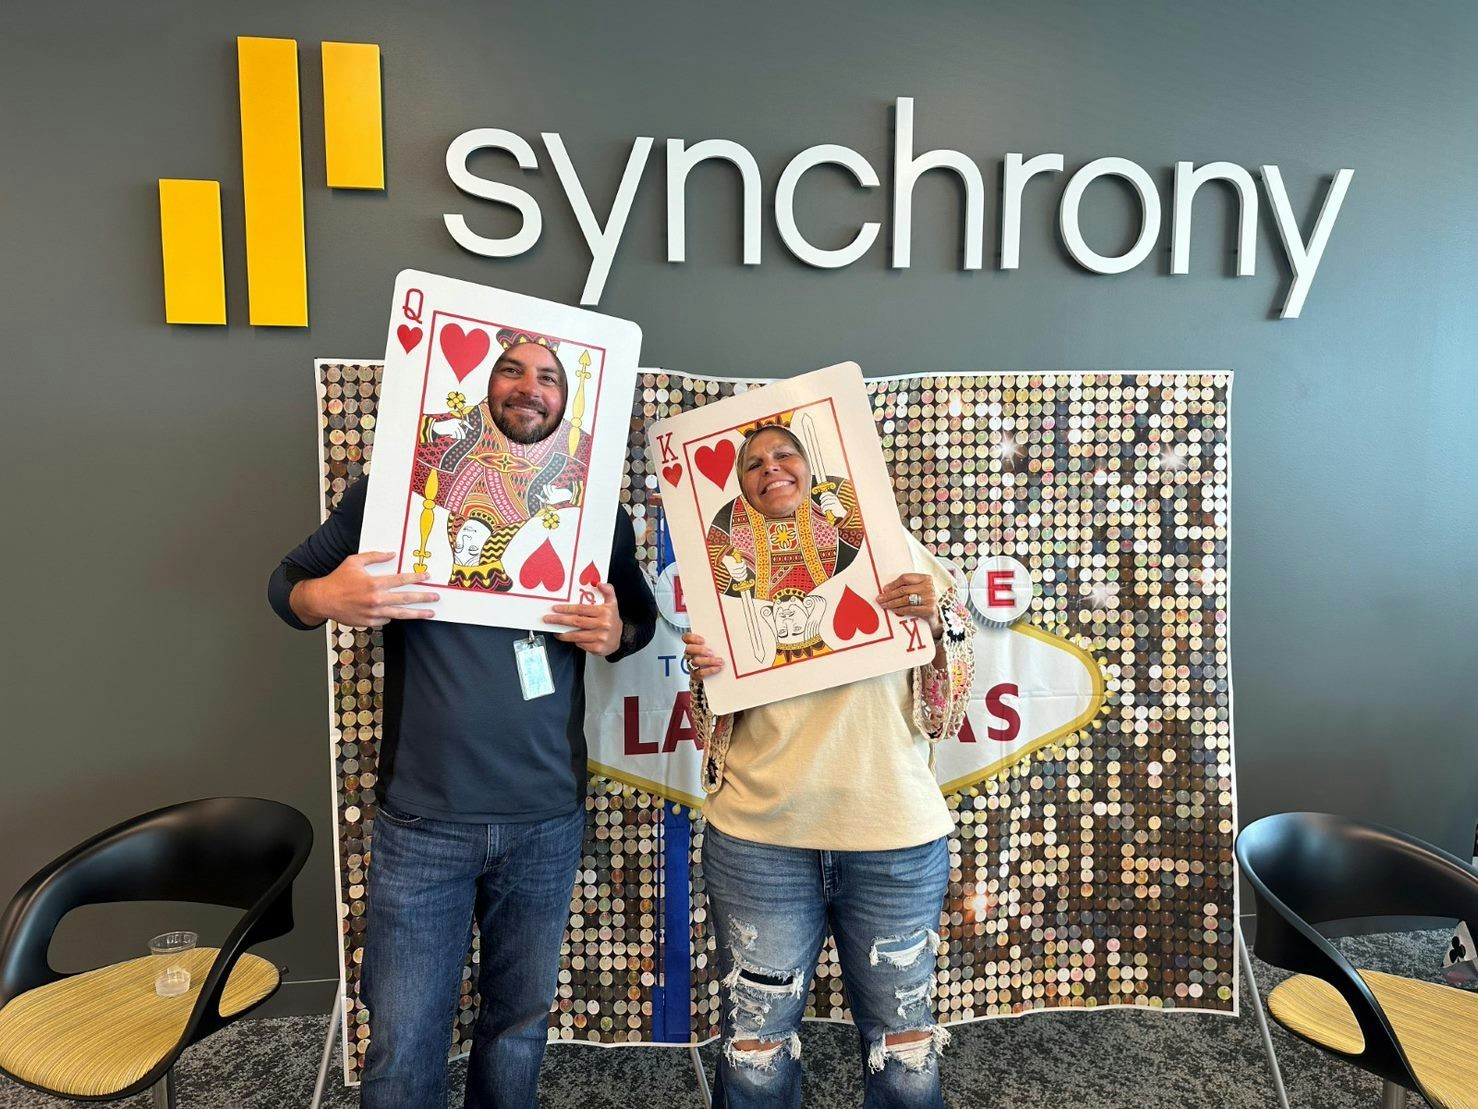 Employees join in on the fun of our company wide weekly connection day activities (and free lunch).